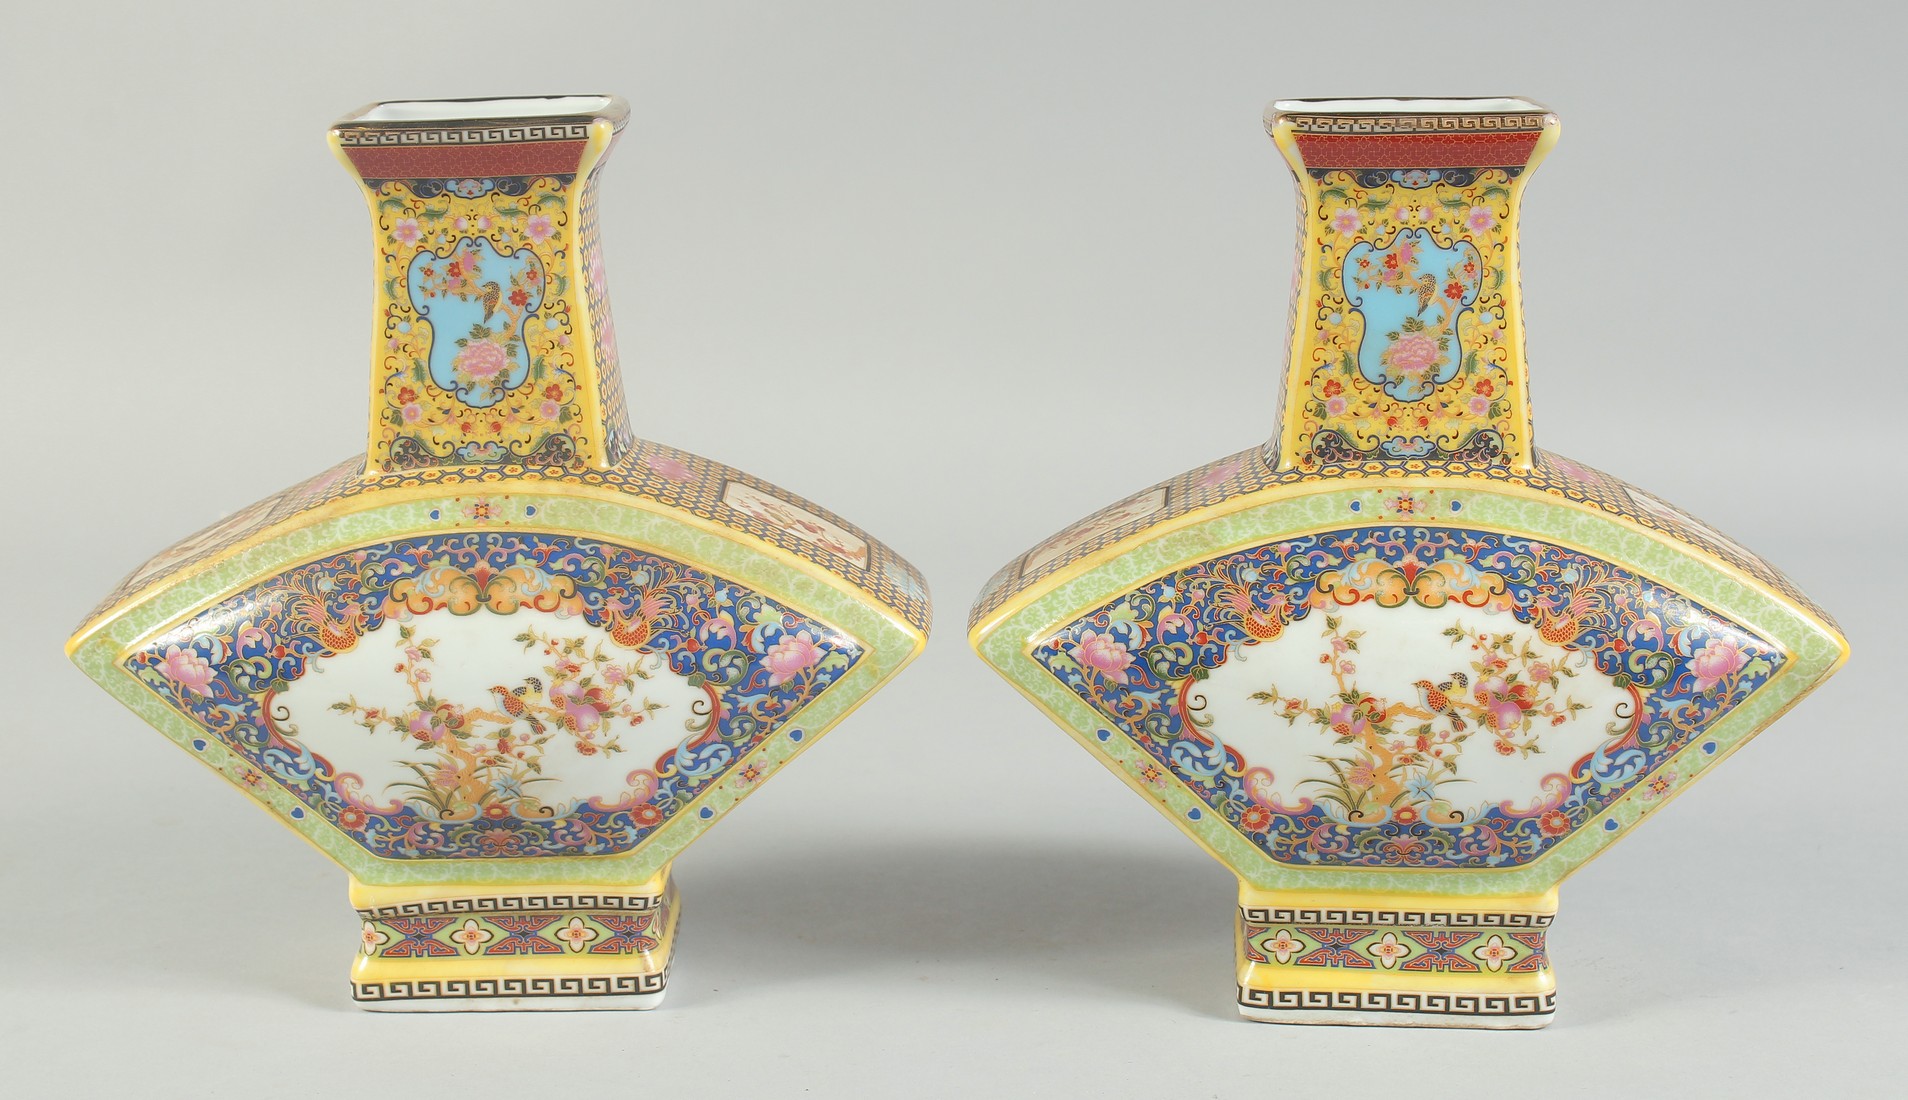 A PAIR OF CHINESE PORCELAIN FAN SHAPED VASES. 8.5ins high.